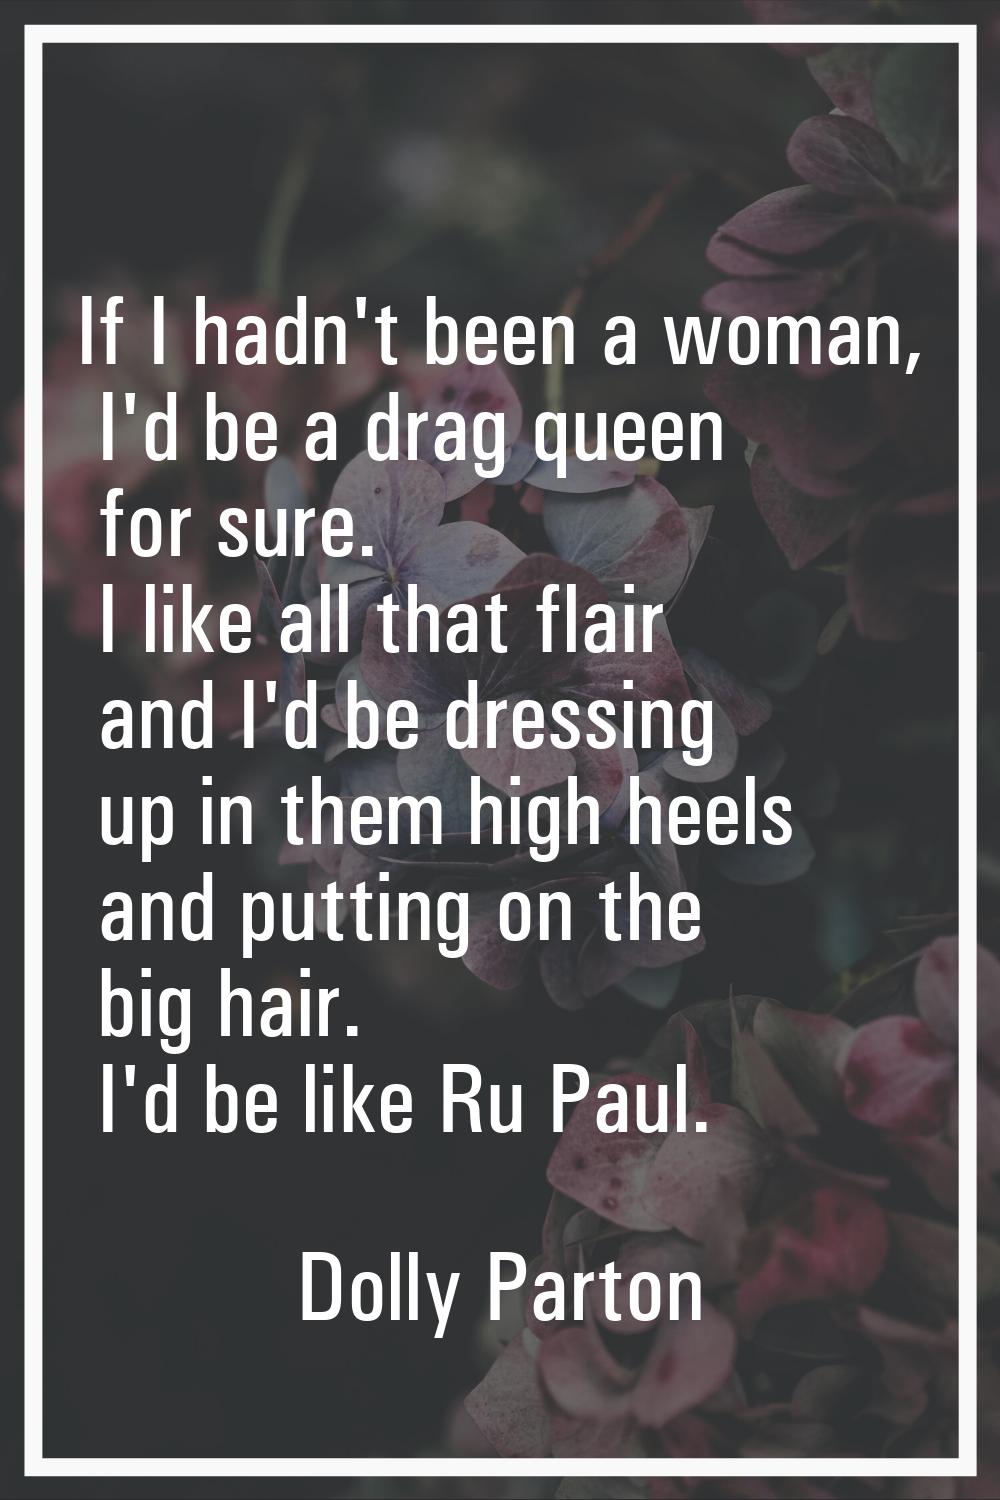 If I hadn't been a woman, I'd be a drag queen for sure. I like all that flair and I'd be dressing u